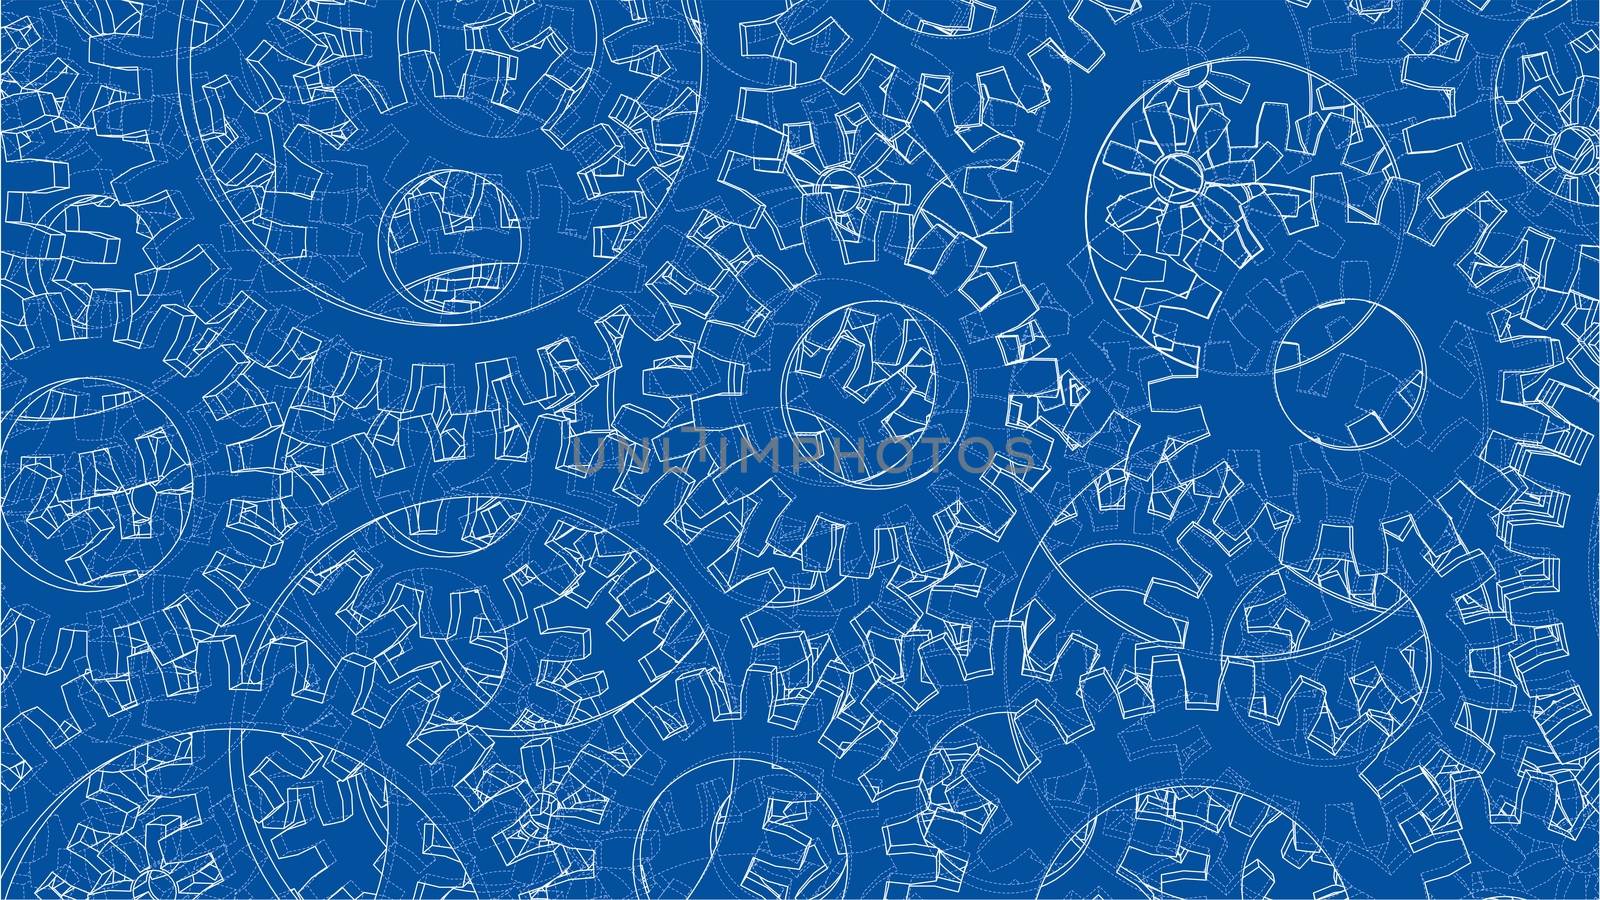 Background consisting of gears. Blueprint Style. 3D Rendering. Architecture Design Background